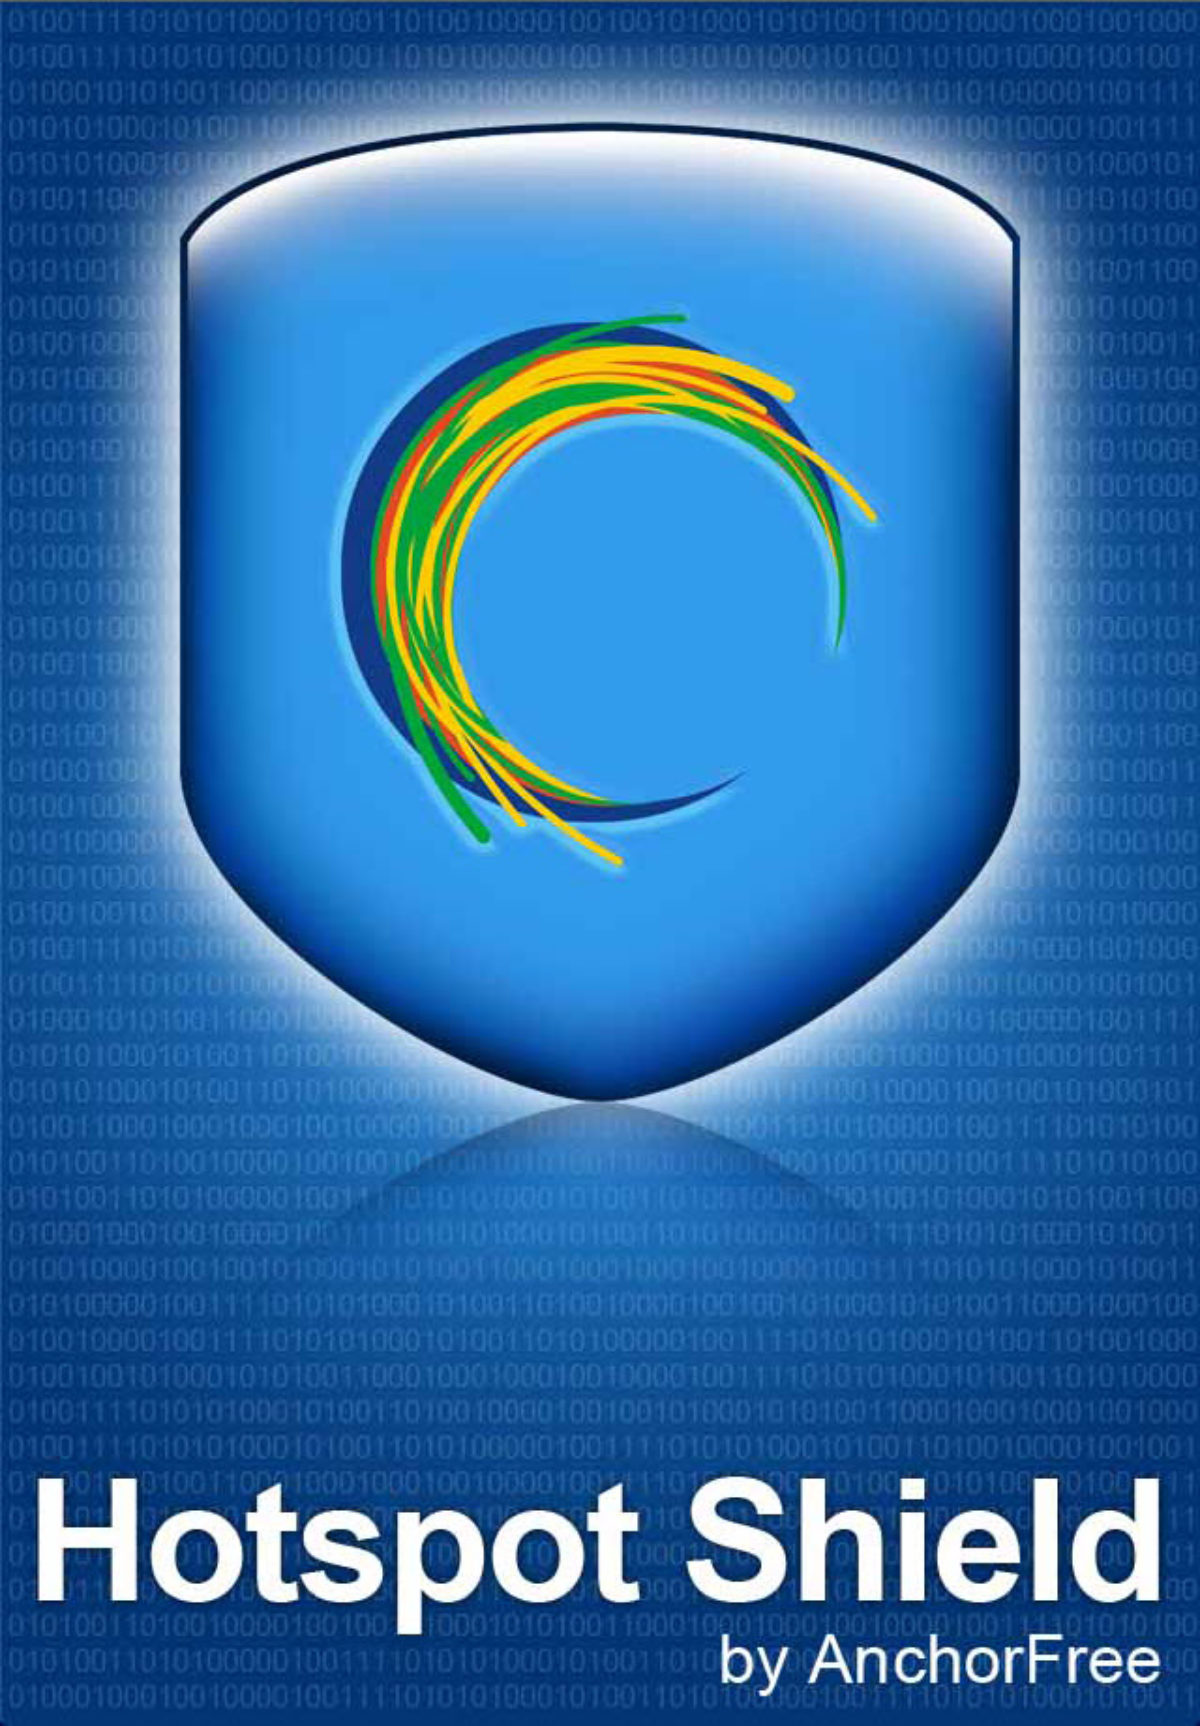 what is anchorfree hotspot shield